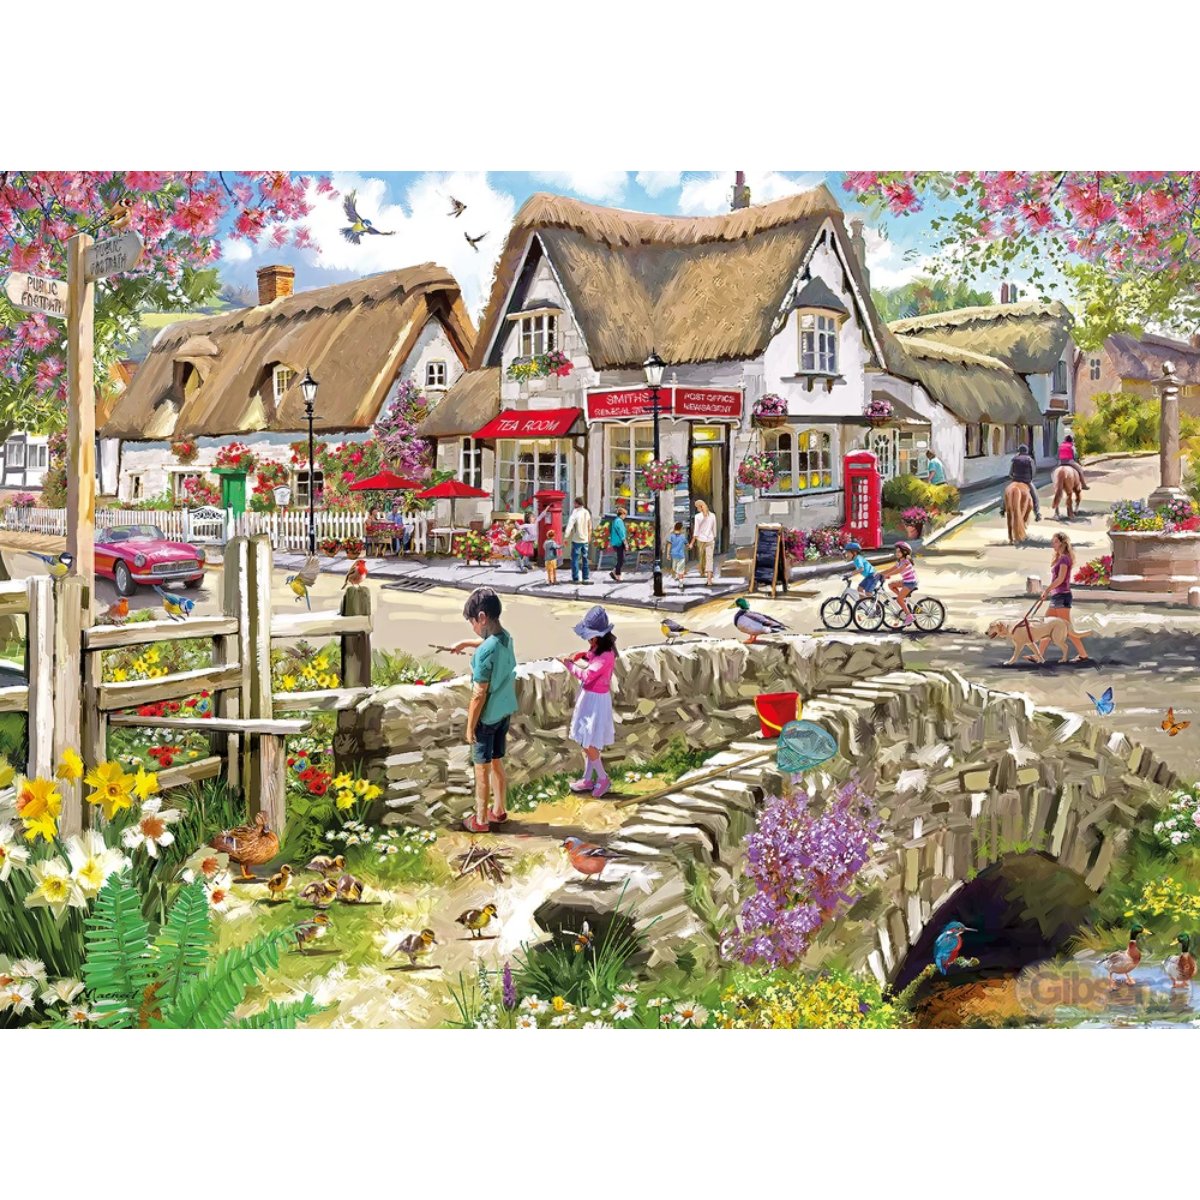 Gibsons Daffodils & Ducklings 1000 Piece Jigsaw Puzzle - G6319